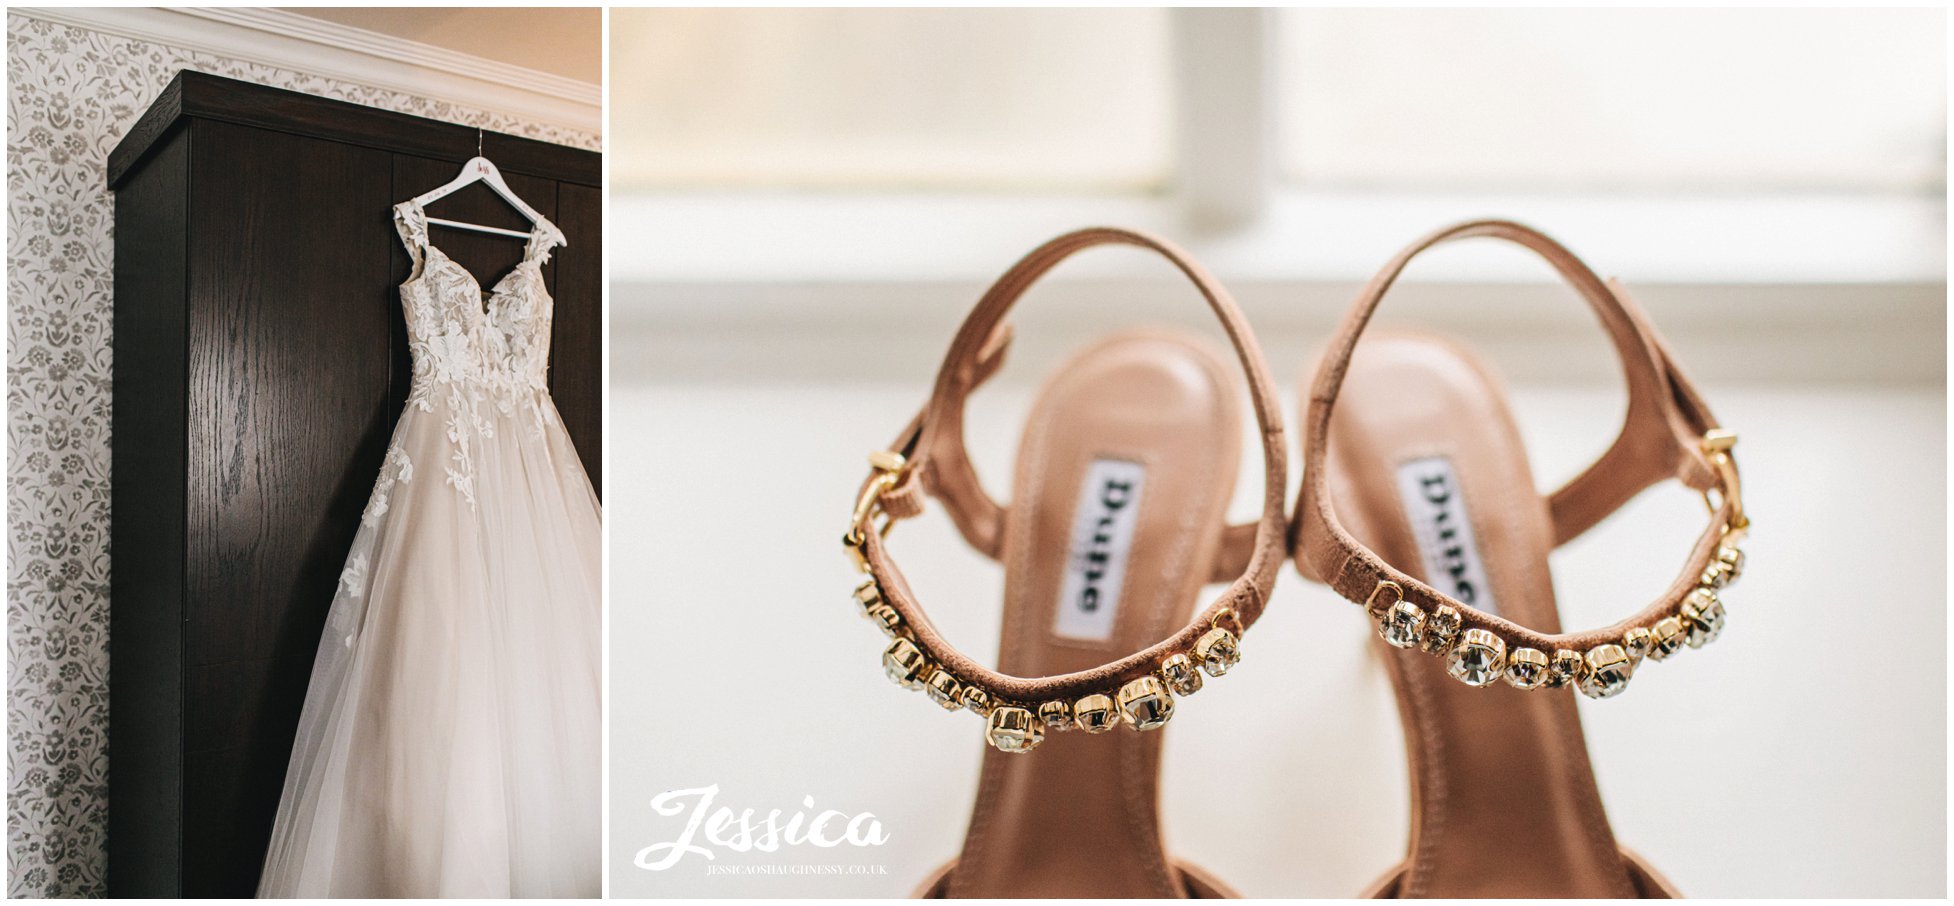 wedding dress and bridal shoes at a cheshire wedding